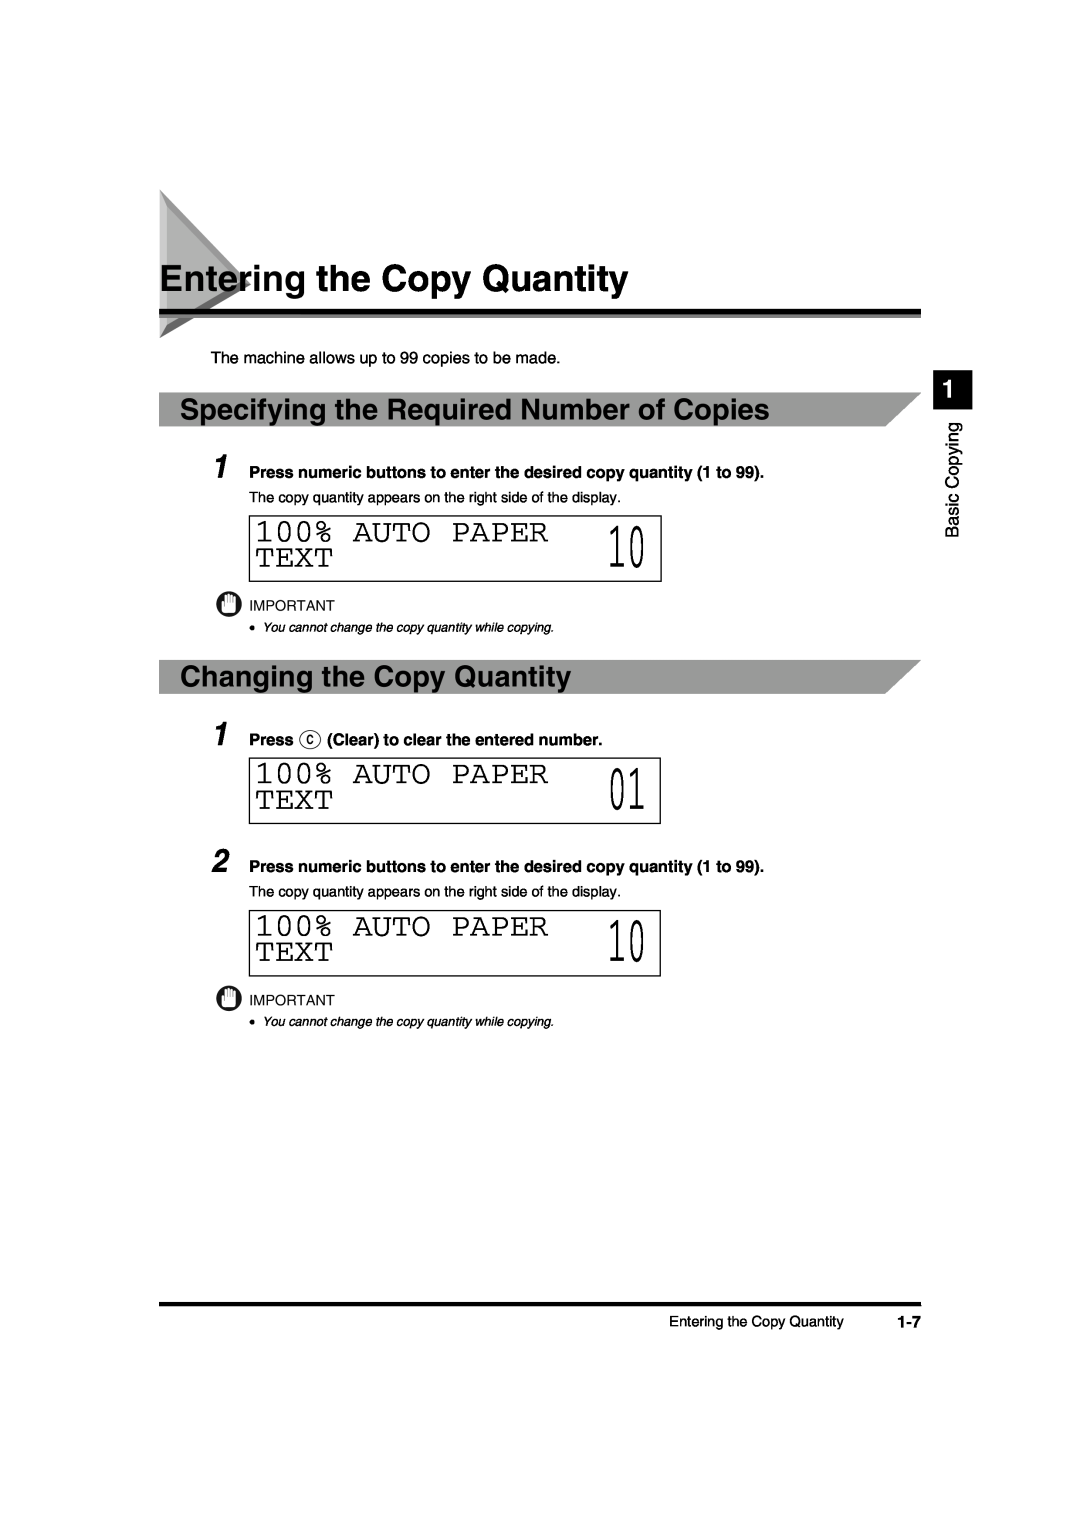 Canon IR1600 Entering the Copy Quantity, 100%, Auto Paper, Text, Specifying the Required Number of Copies, Basic Copying 